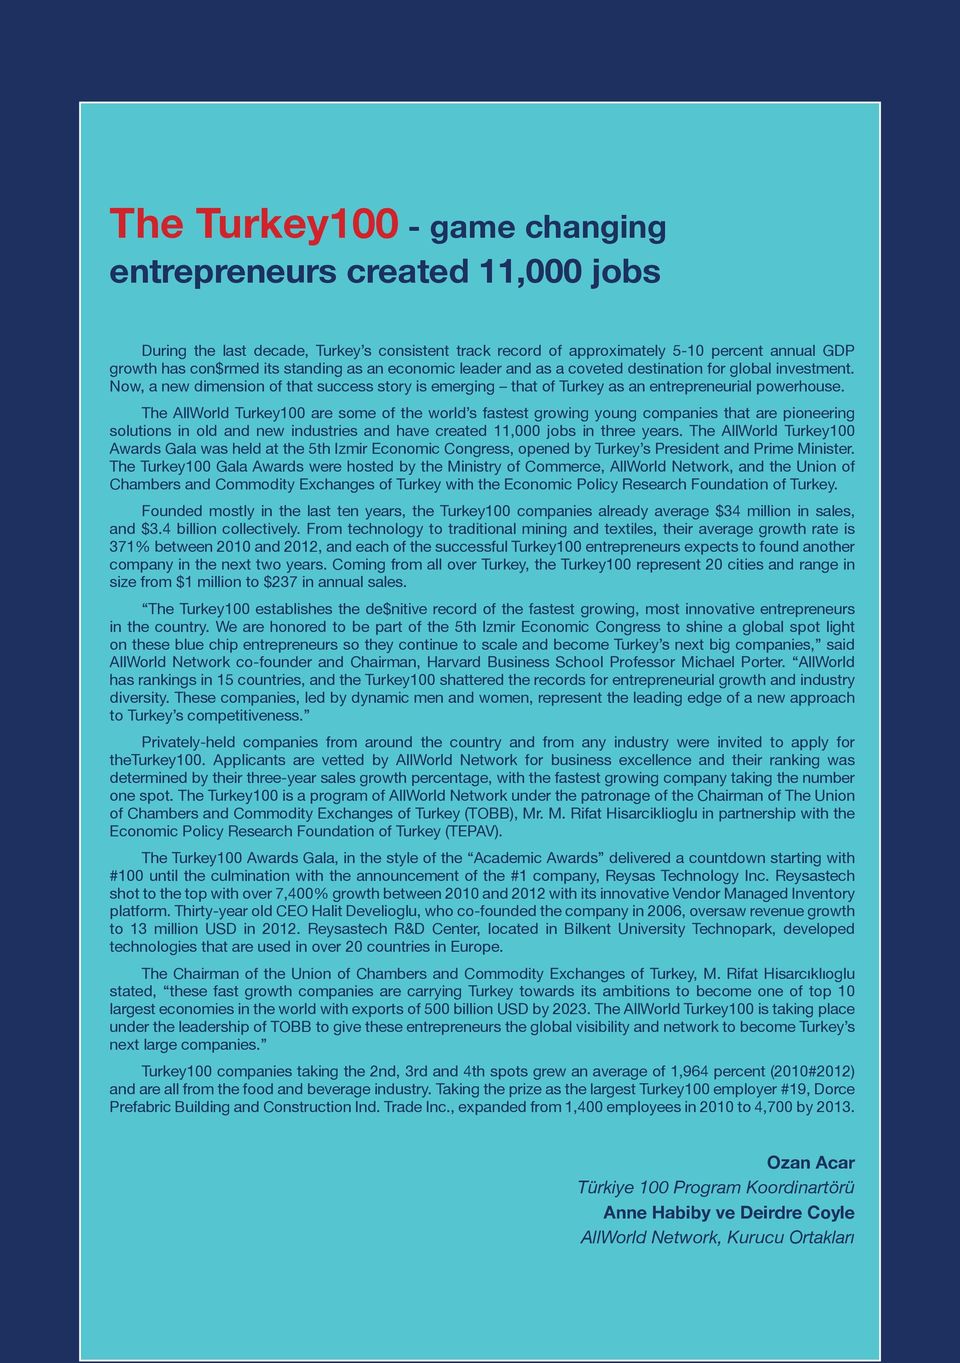 The AllWorld Turkey100 are some of the world s fastest growing young companies that are pioneering solutions in old and new industries and have created 11,000 jobs in three years.